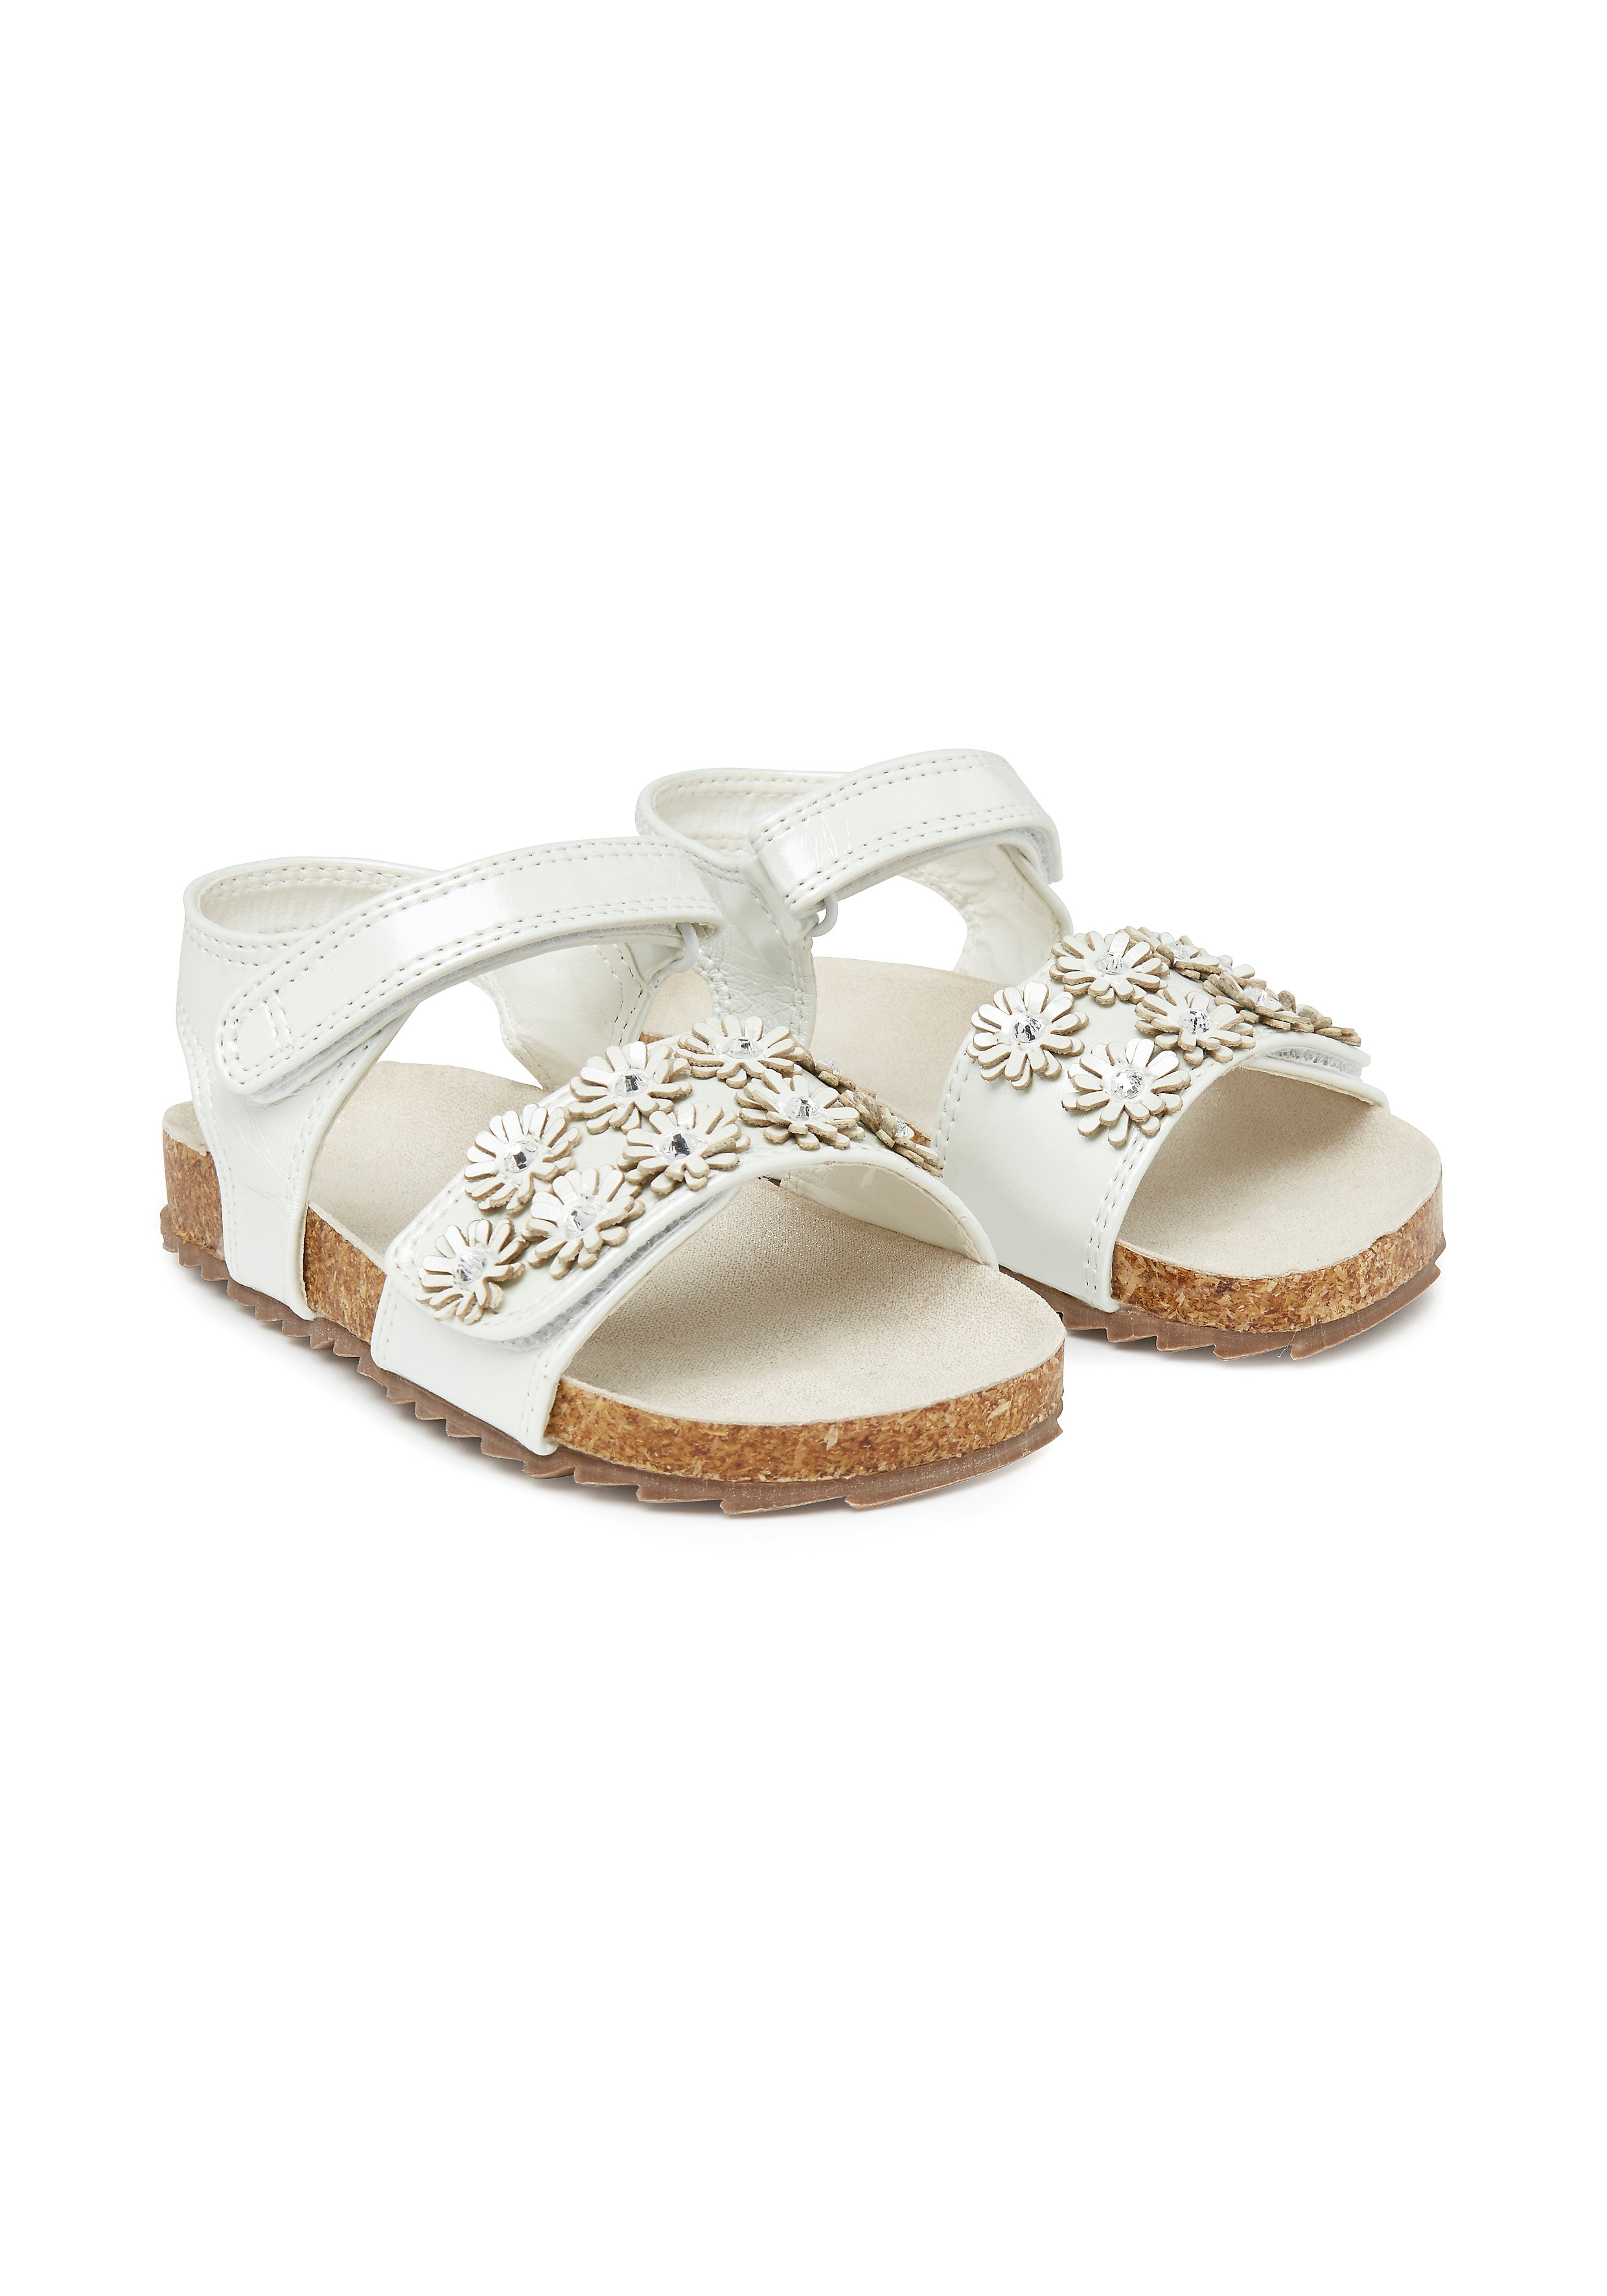 Mothercare | Girls Flower Footbed Sandals - Cream 0